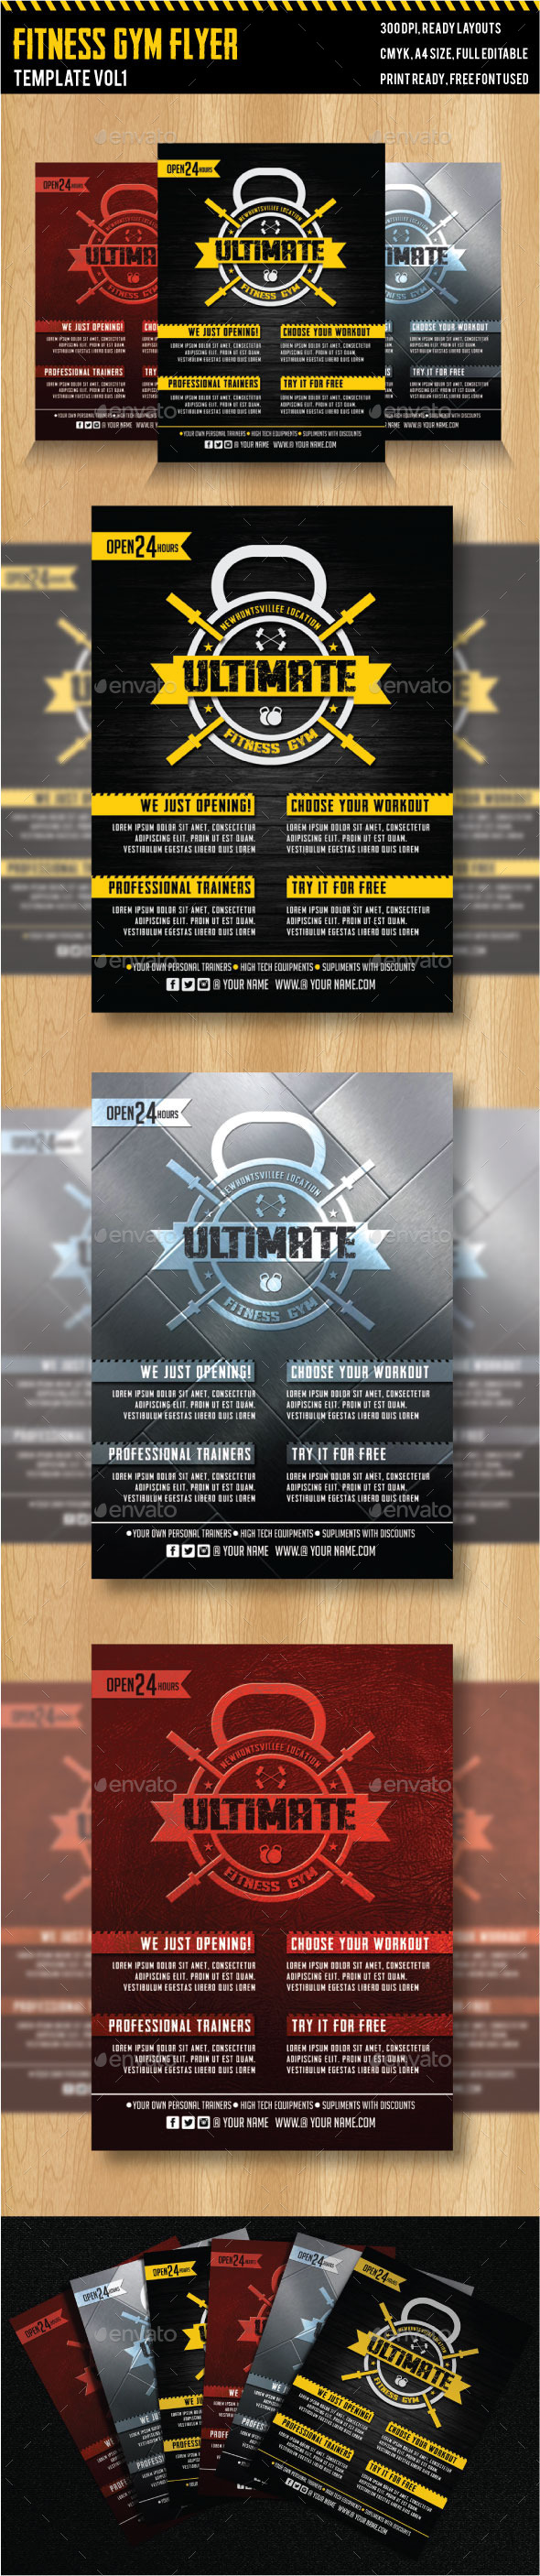 Fitness - Gym Flyer Templates